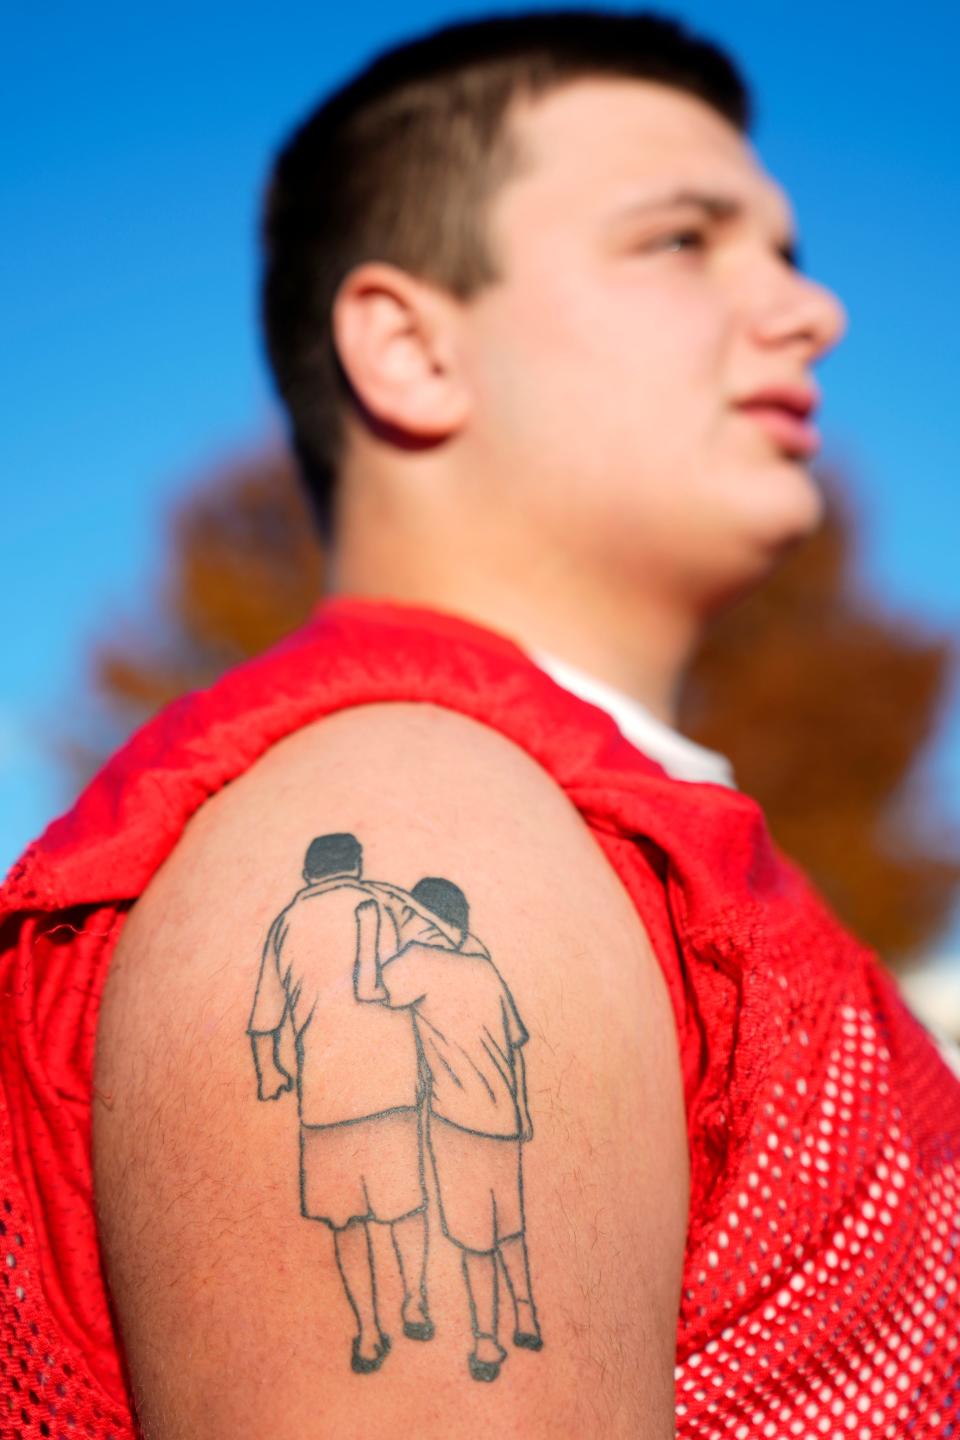 RJ Ussher, of the Westwood High School Football Team, is shown with his tattoo of him alongside his father. Ussher's father died in 2020 from COVID. Tuesday, November 14, 2023